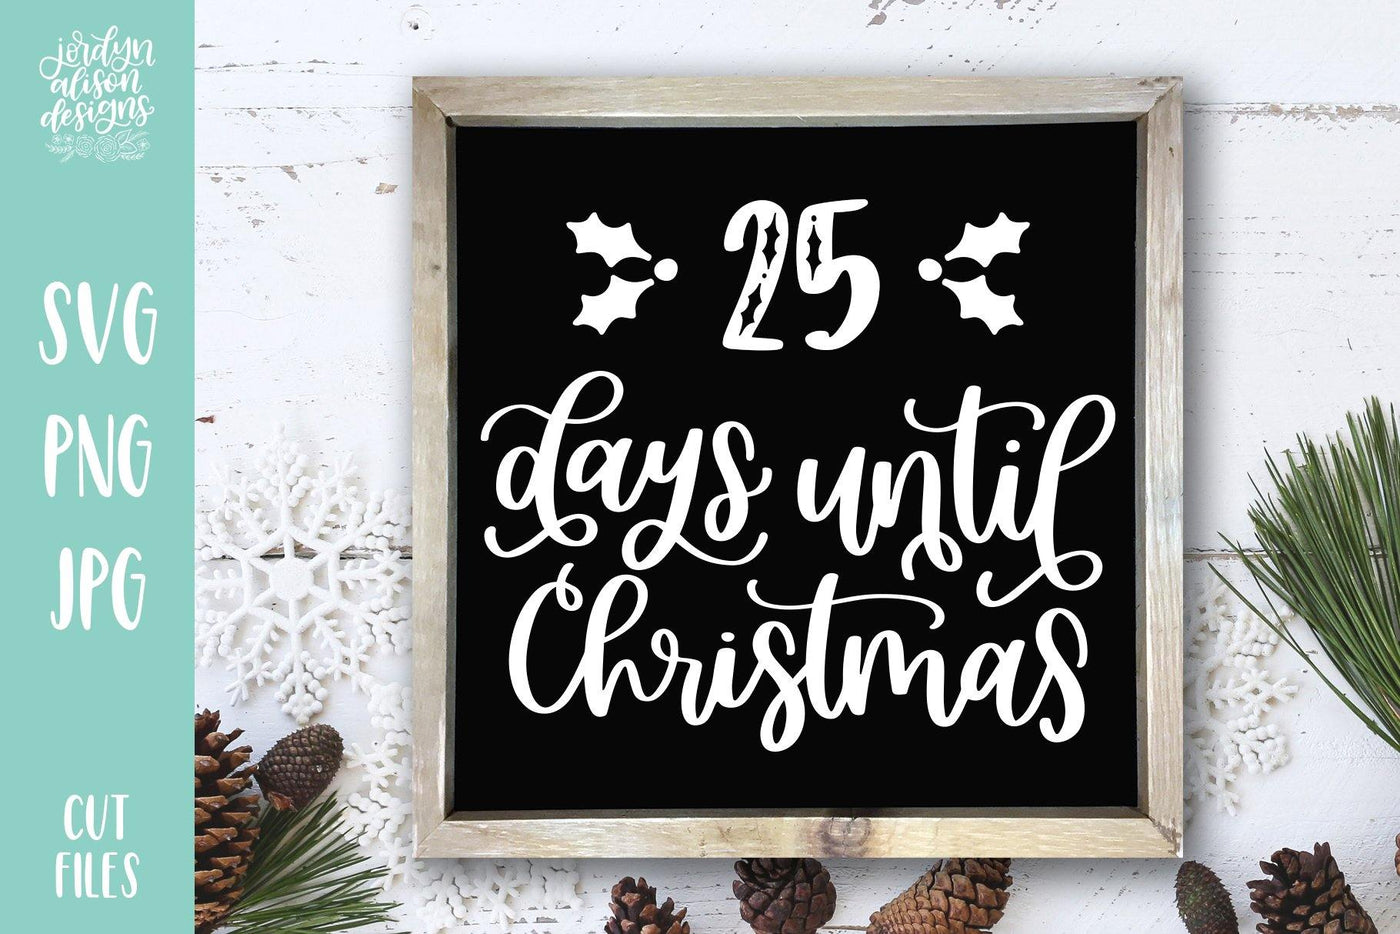 Square Chalkboard framed with handwritten text "25 days until Christmas"